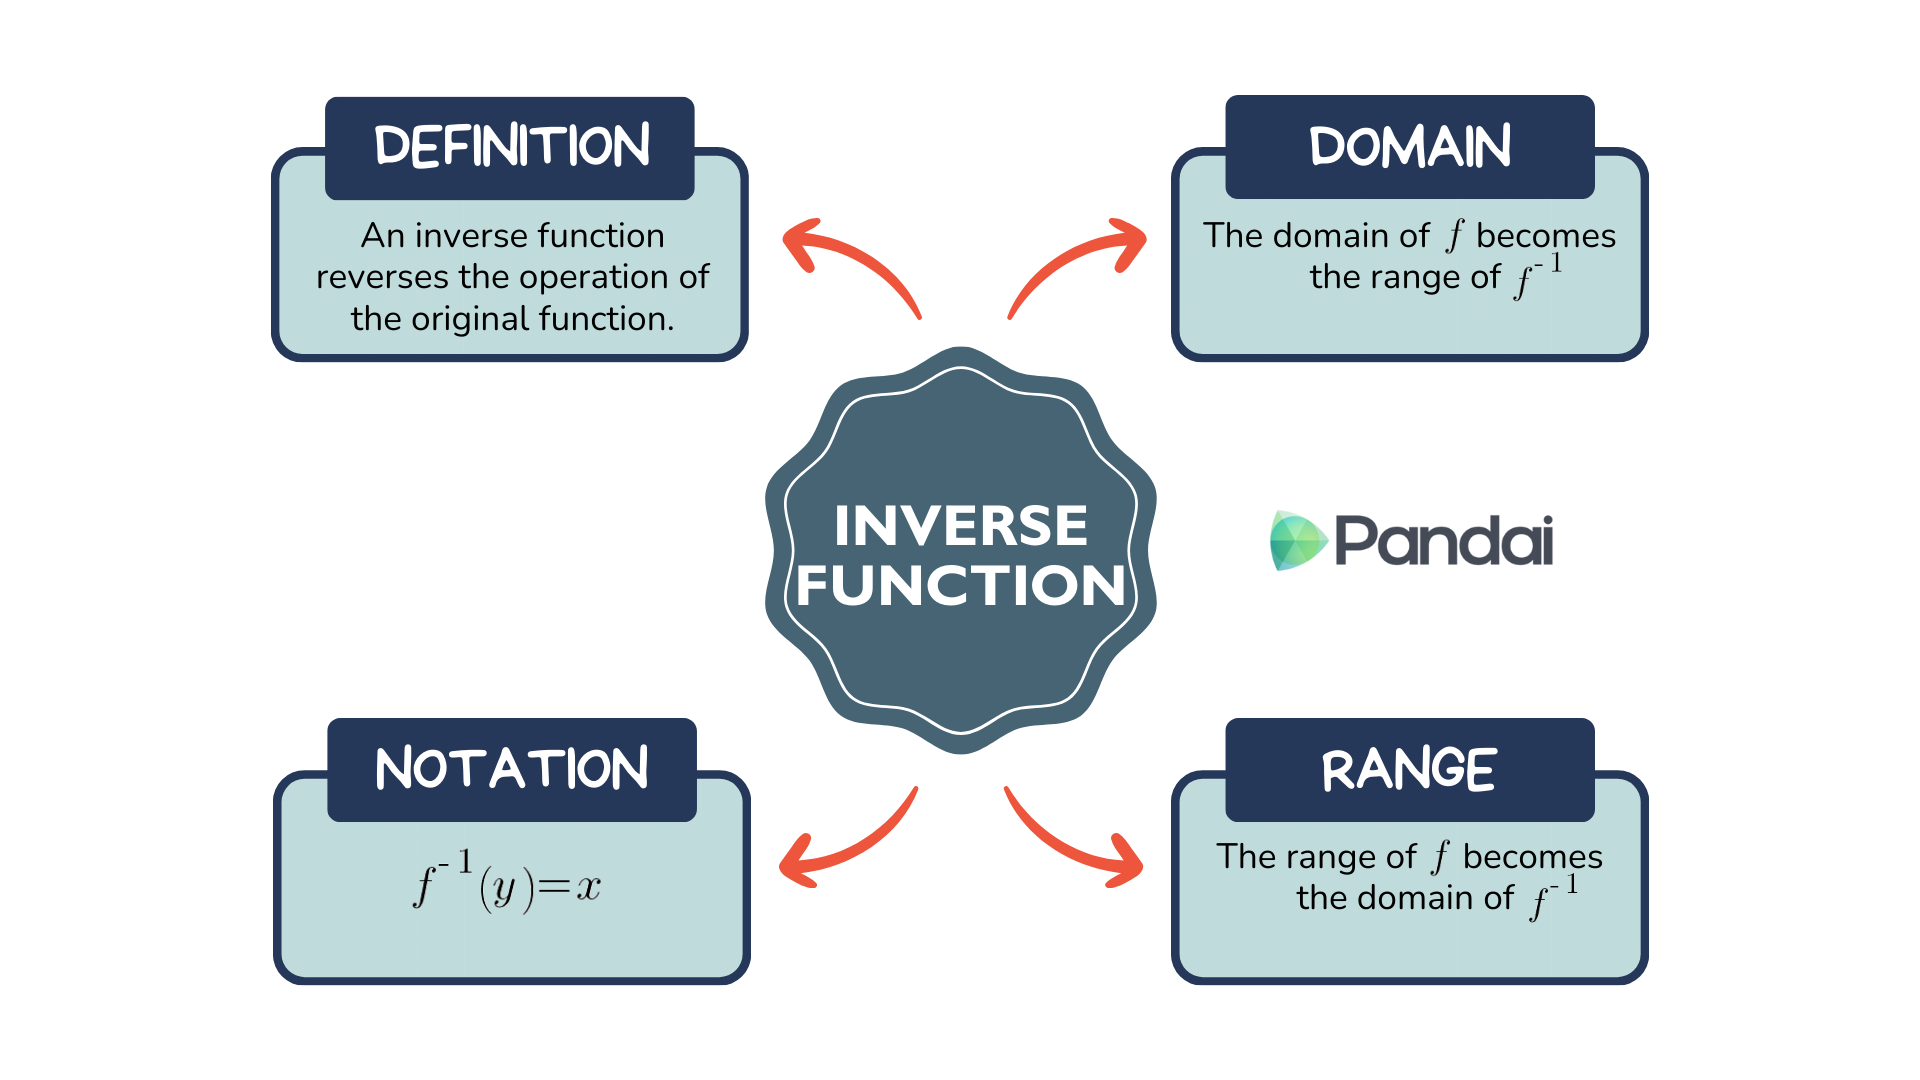 Detailed mind map of inverse function definition, notation, domain, and range.